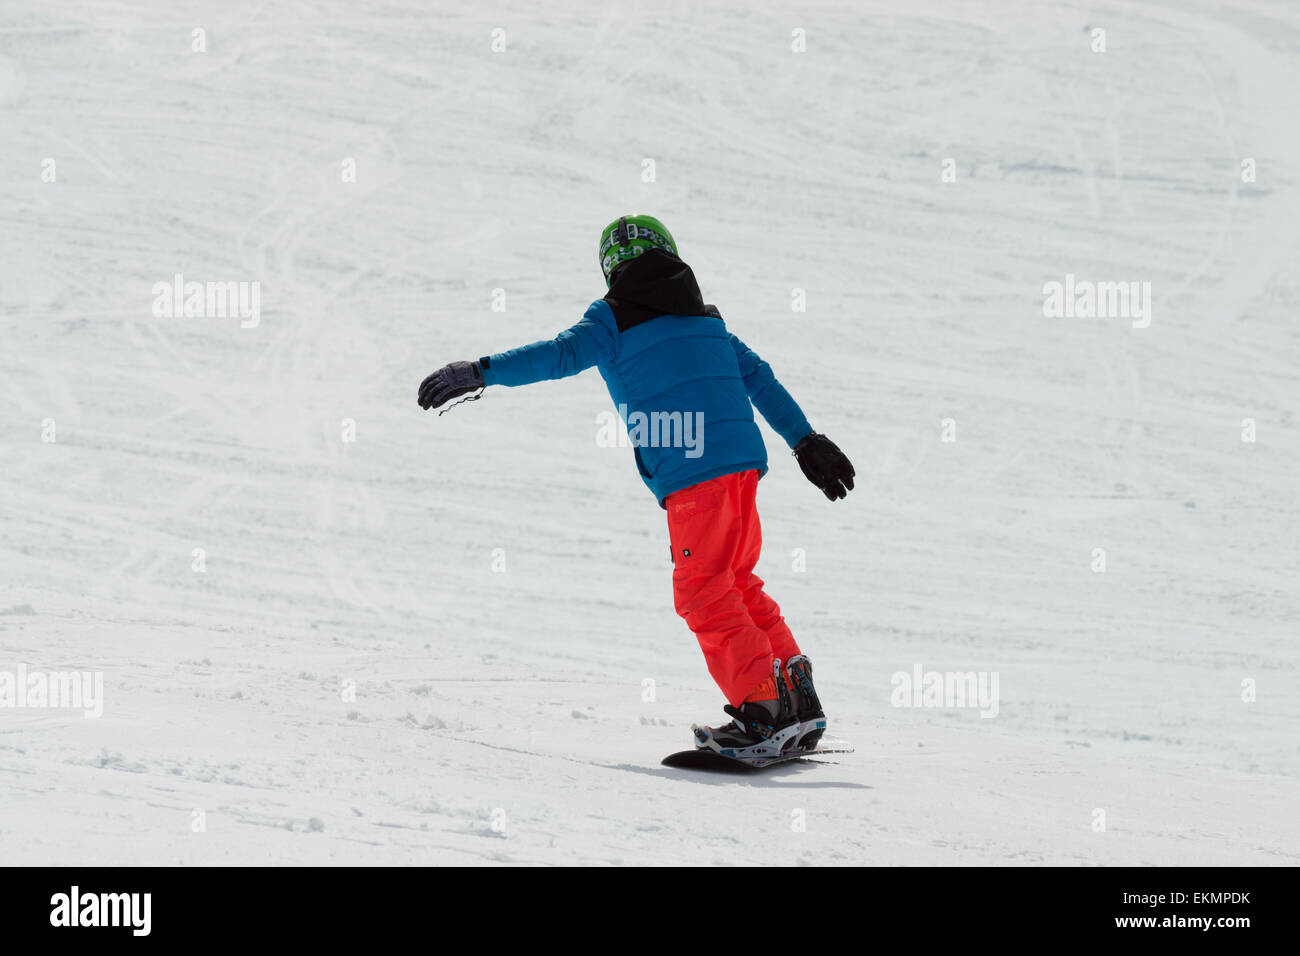 A smooth child snowboarder, is speeding down the alps while turning left to keep the momentum going. Stock Photo